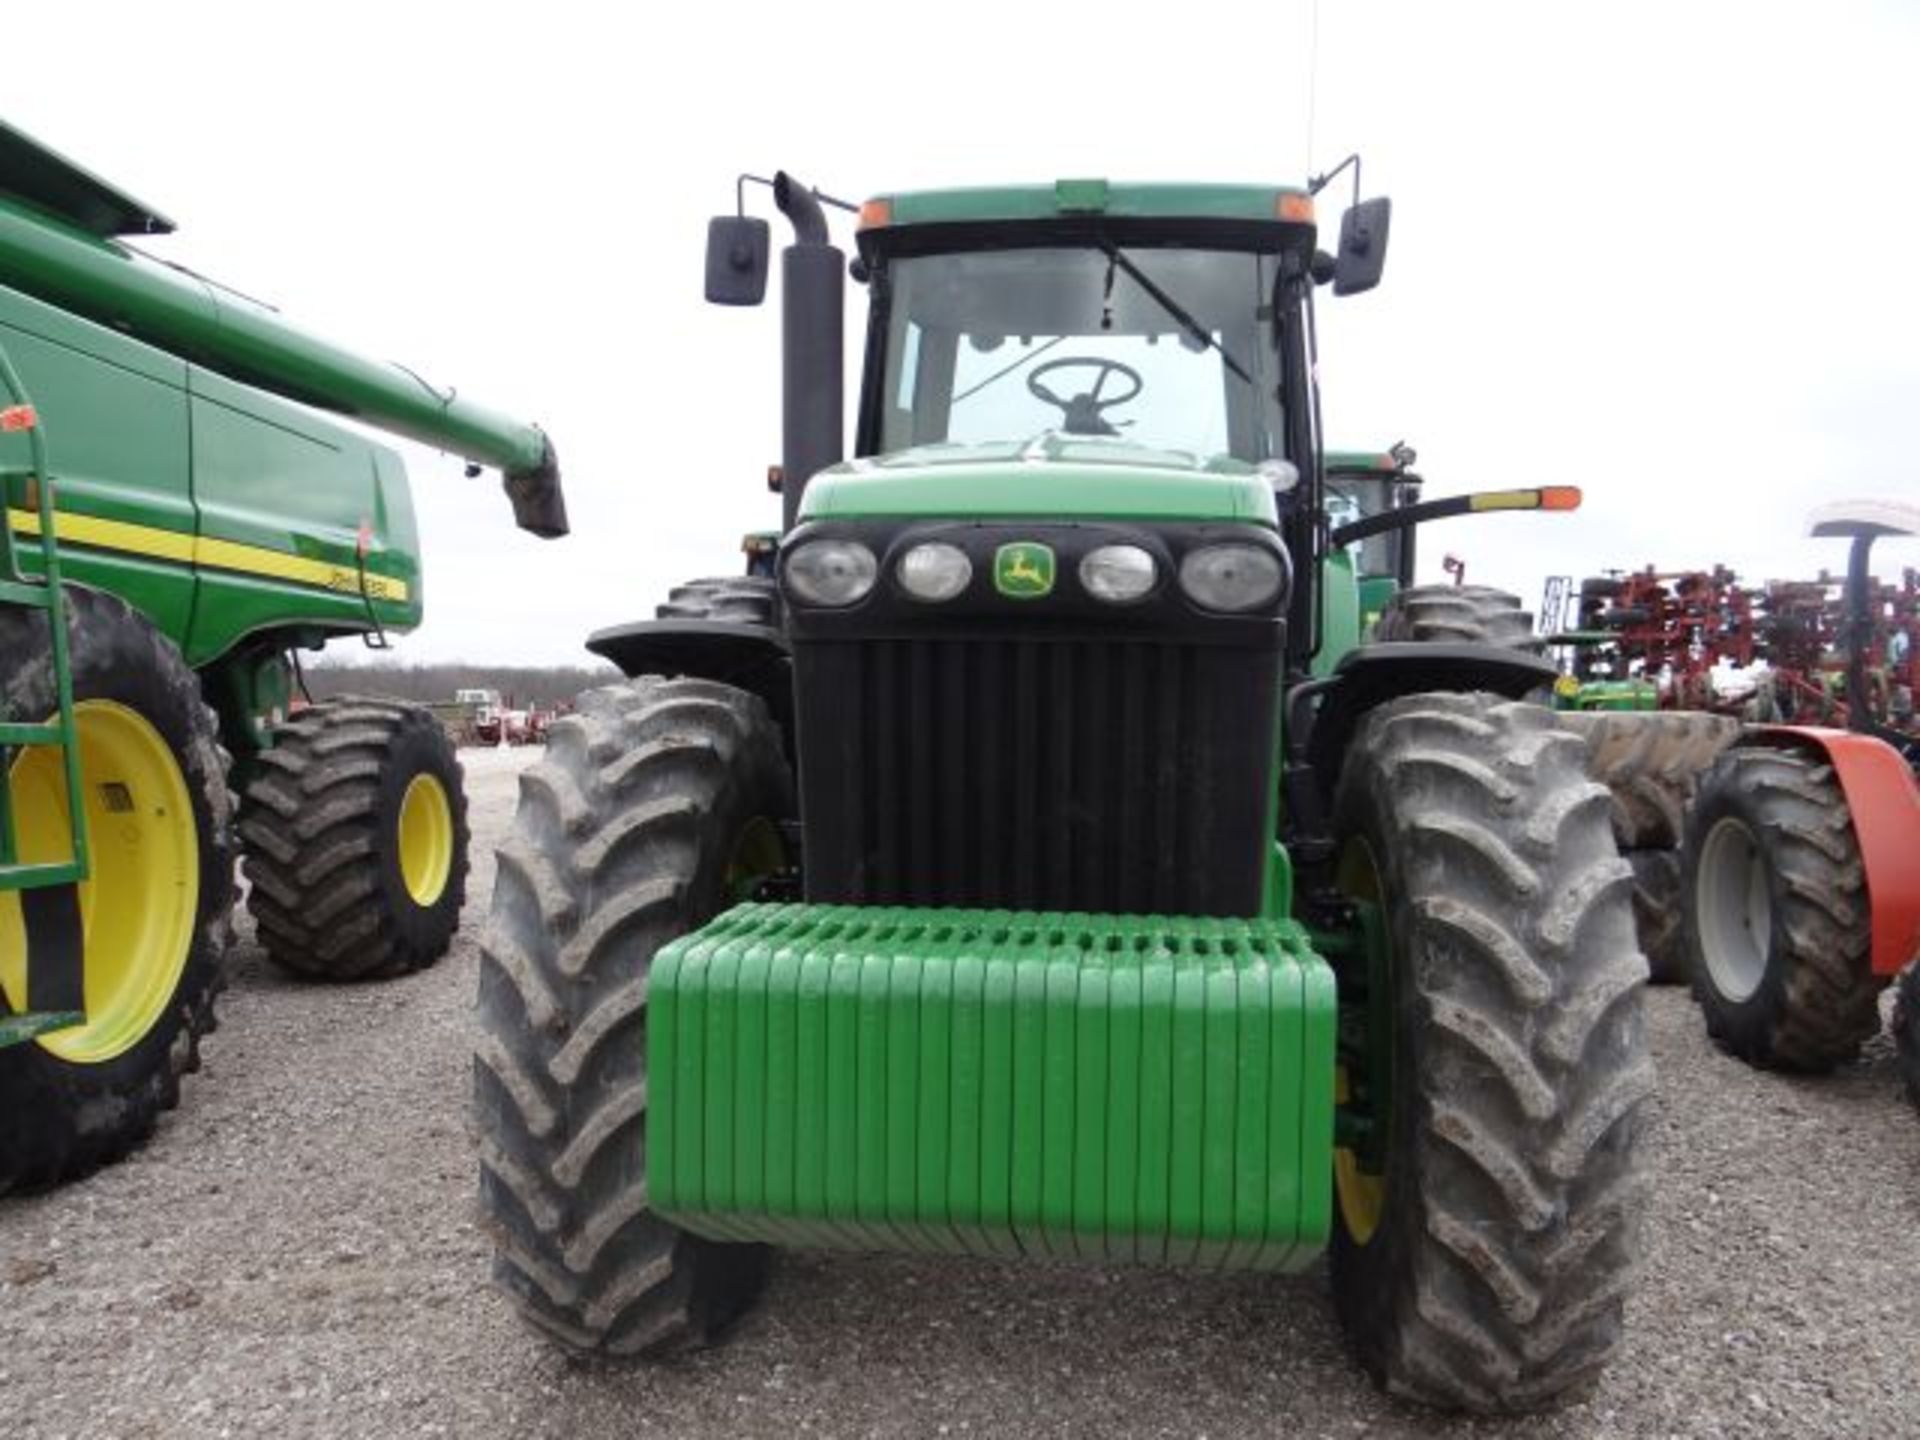 JD8520 Tractor, 2005 Powershift, ILS, 50" Tires, Wt Kit, 4410 hrs - Image 6 of 6